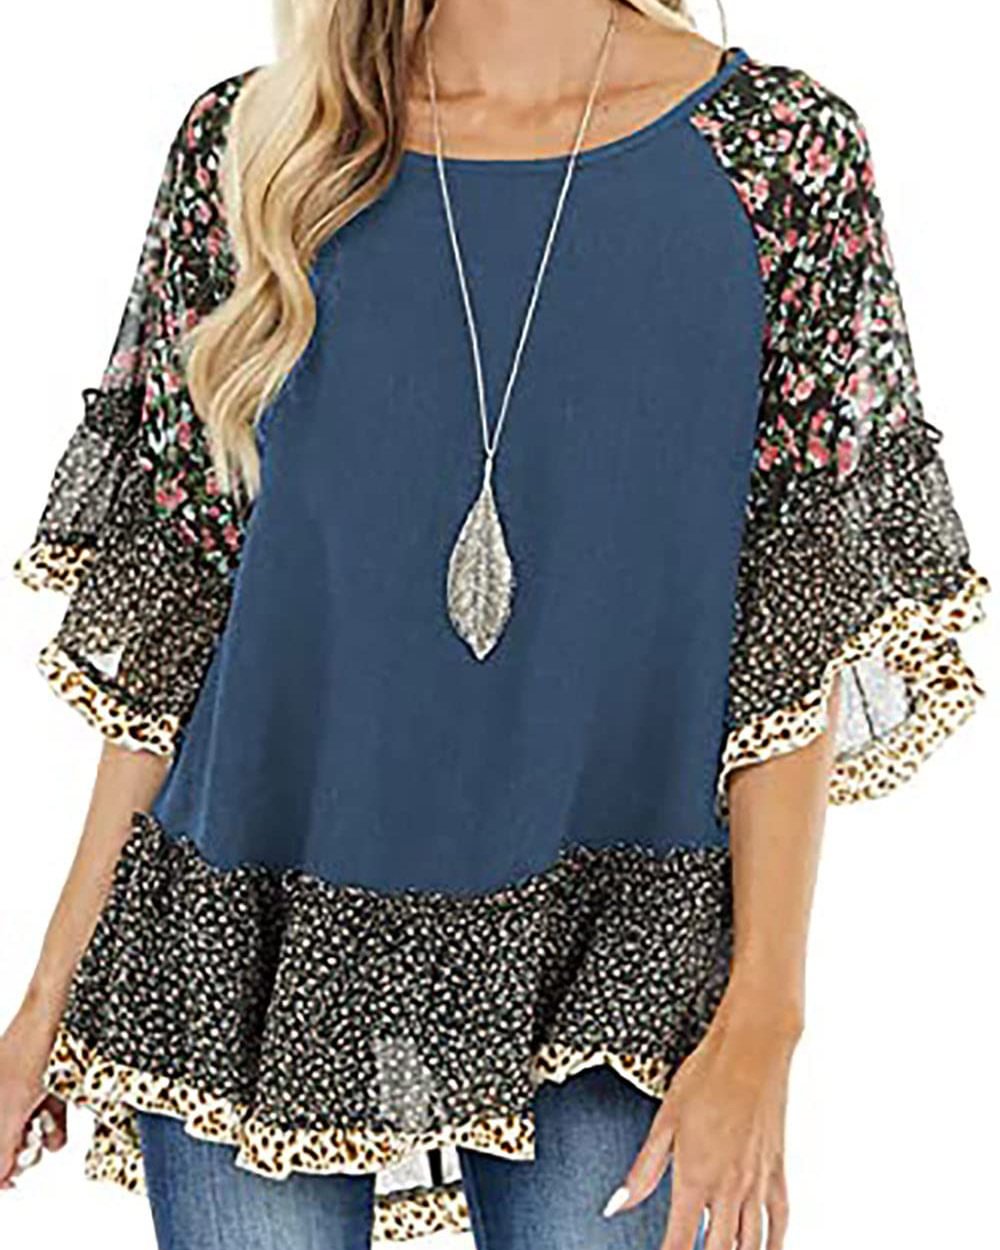 Women's Floral Printed Ruffle 3 4 Sleeve Shirt Batwing Loose Tops Blouses Pullover